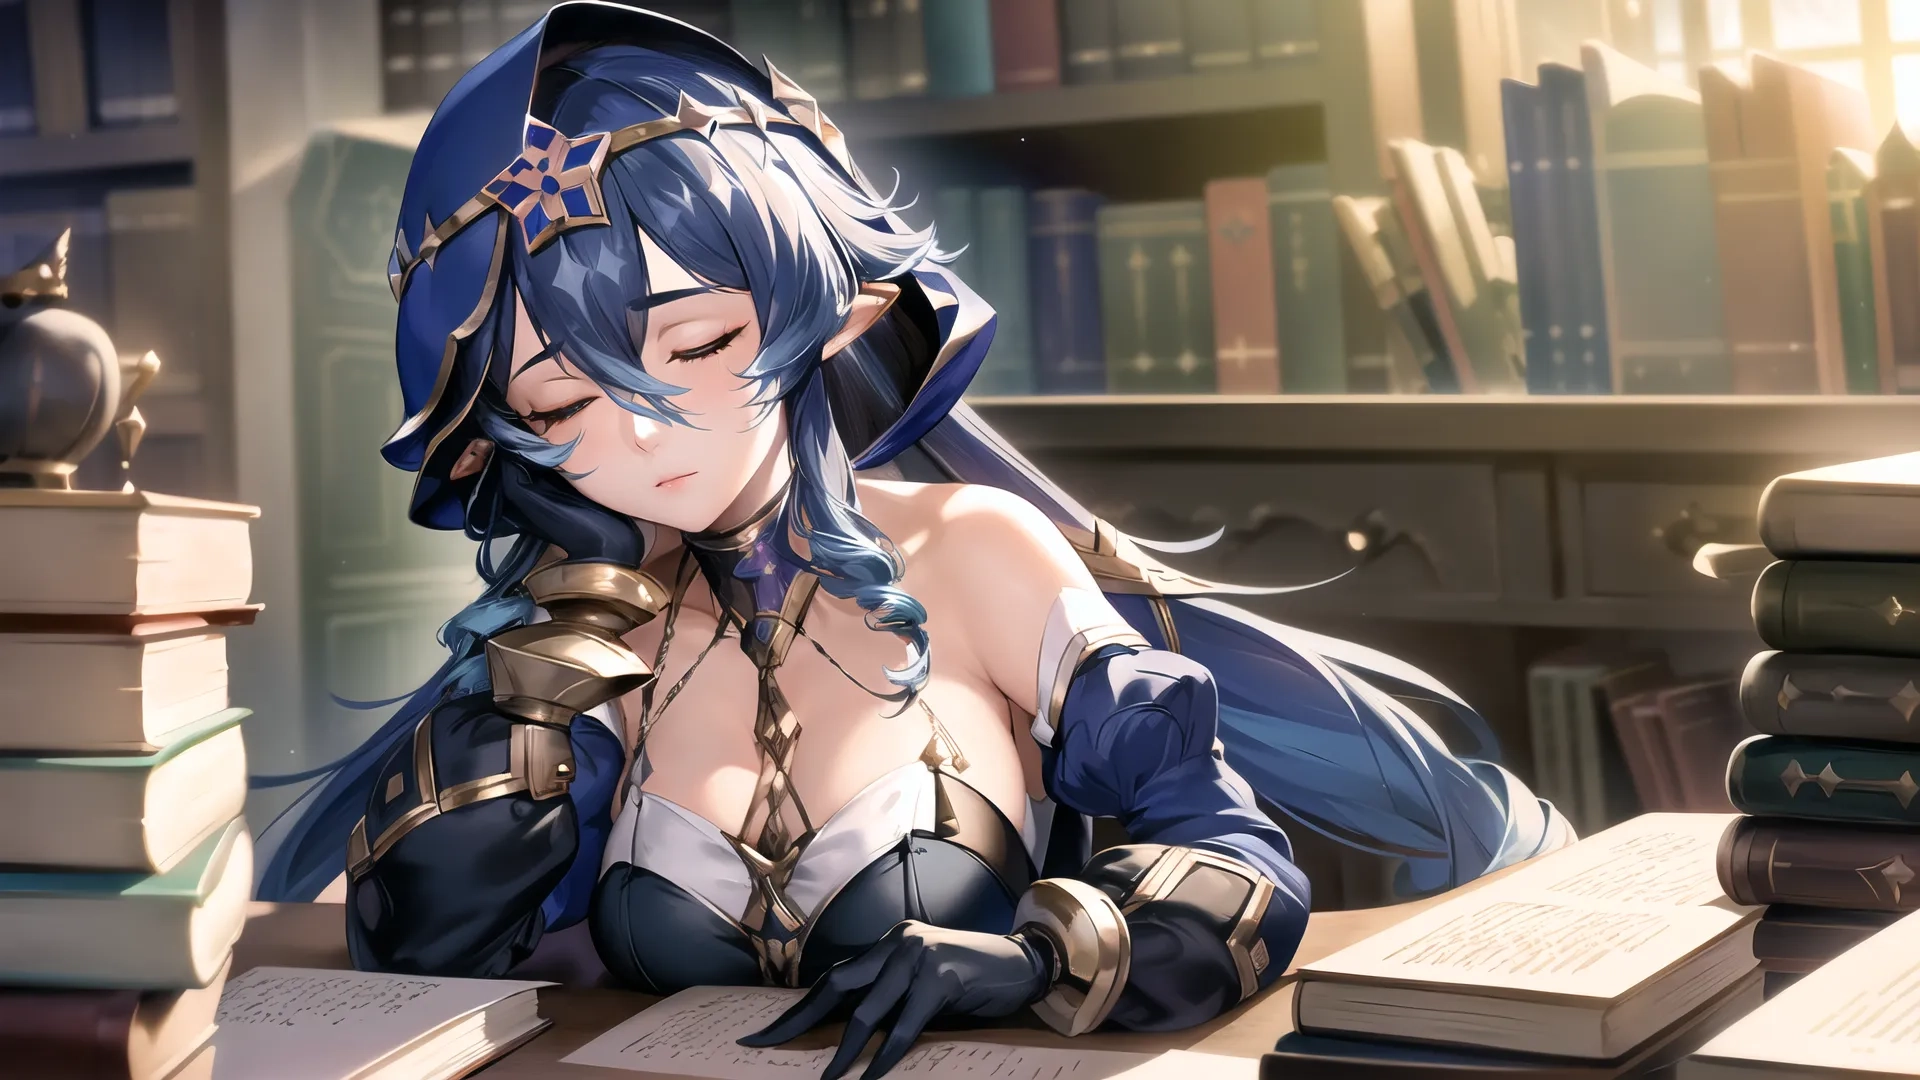 the girl is holding a phone and reading on a desk with books behind her, as if she was very pretty and she appears to be crying
